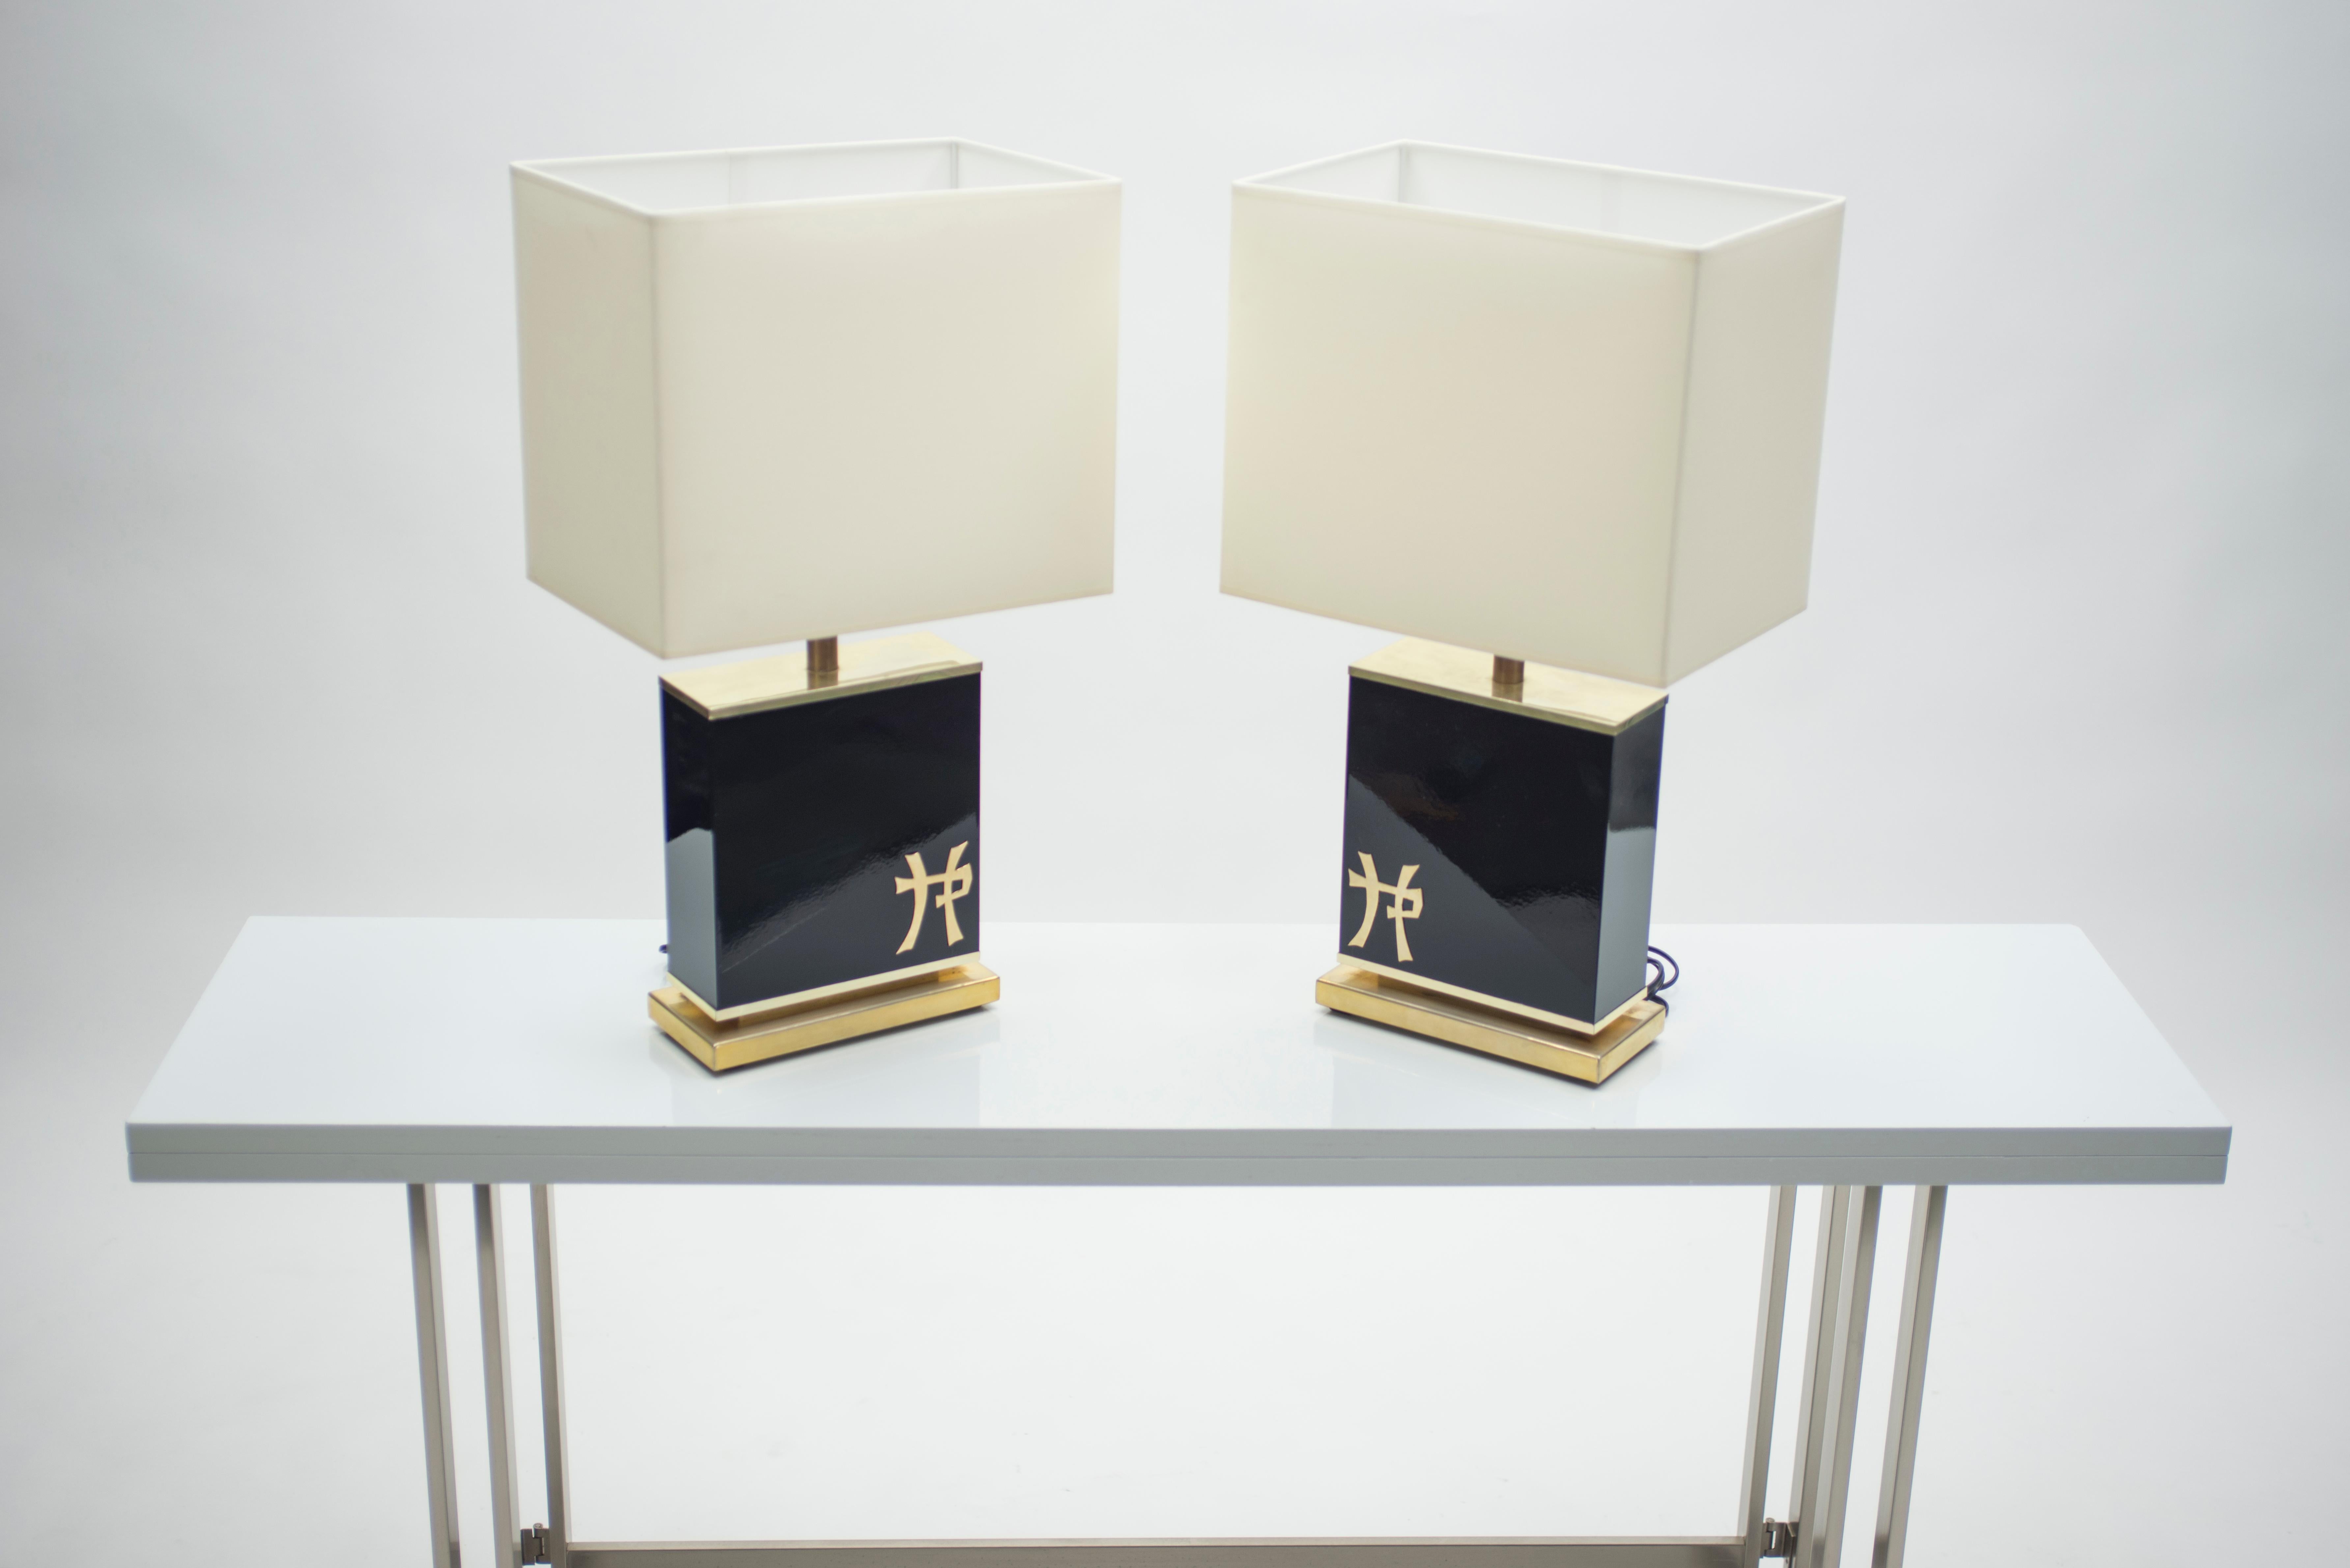 This pair of lamps is typical of designer Jean Claude Mahey’s midcentury brass and lacquer work. A rich black lacquer base feels serious and sophisticated and is offset by brass accents, including Chinese lettering on the base. Their minimal design